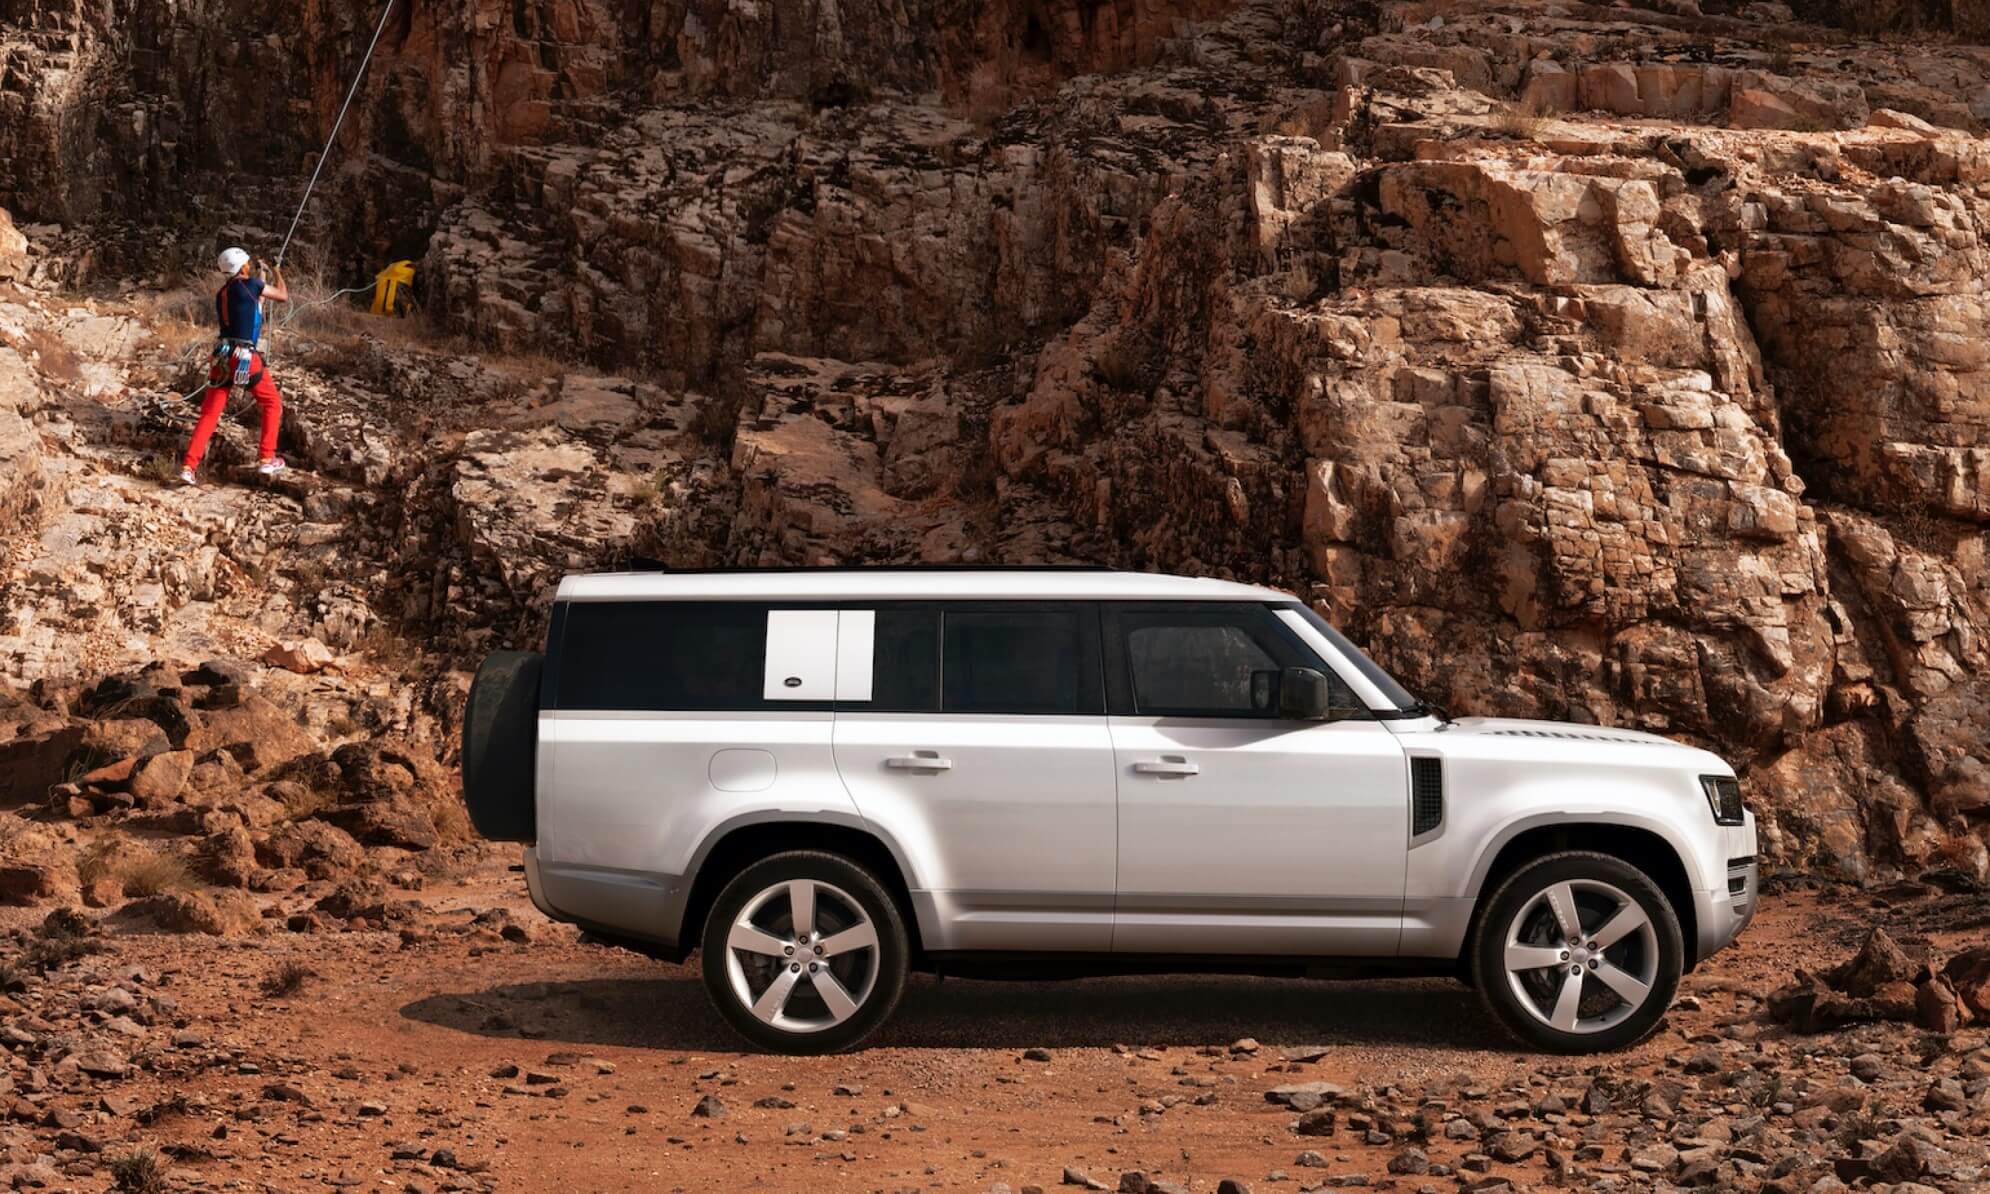 Land Rover Defender 130 Expands The Family [w/video]